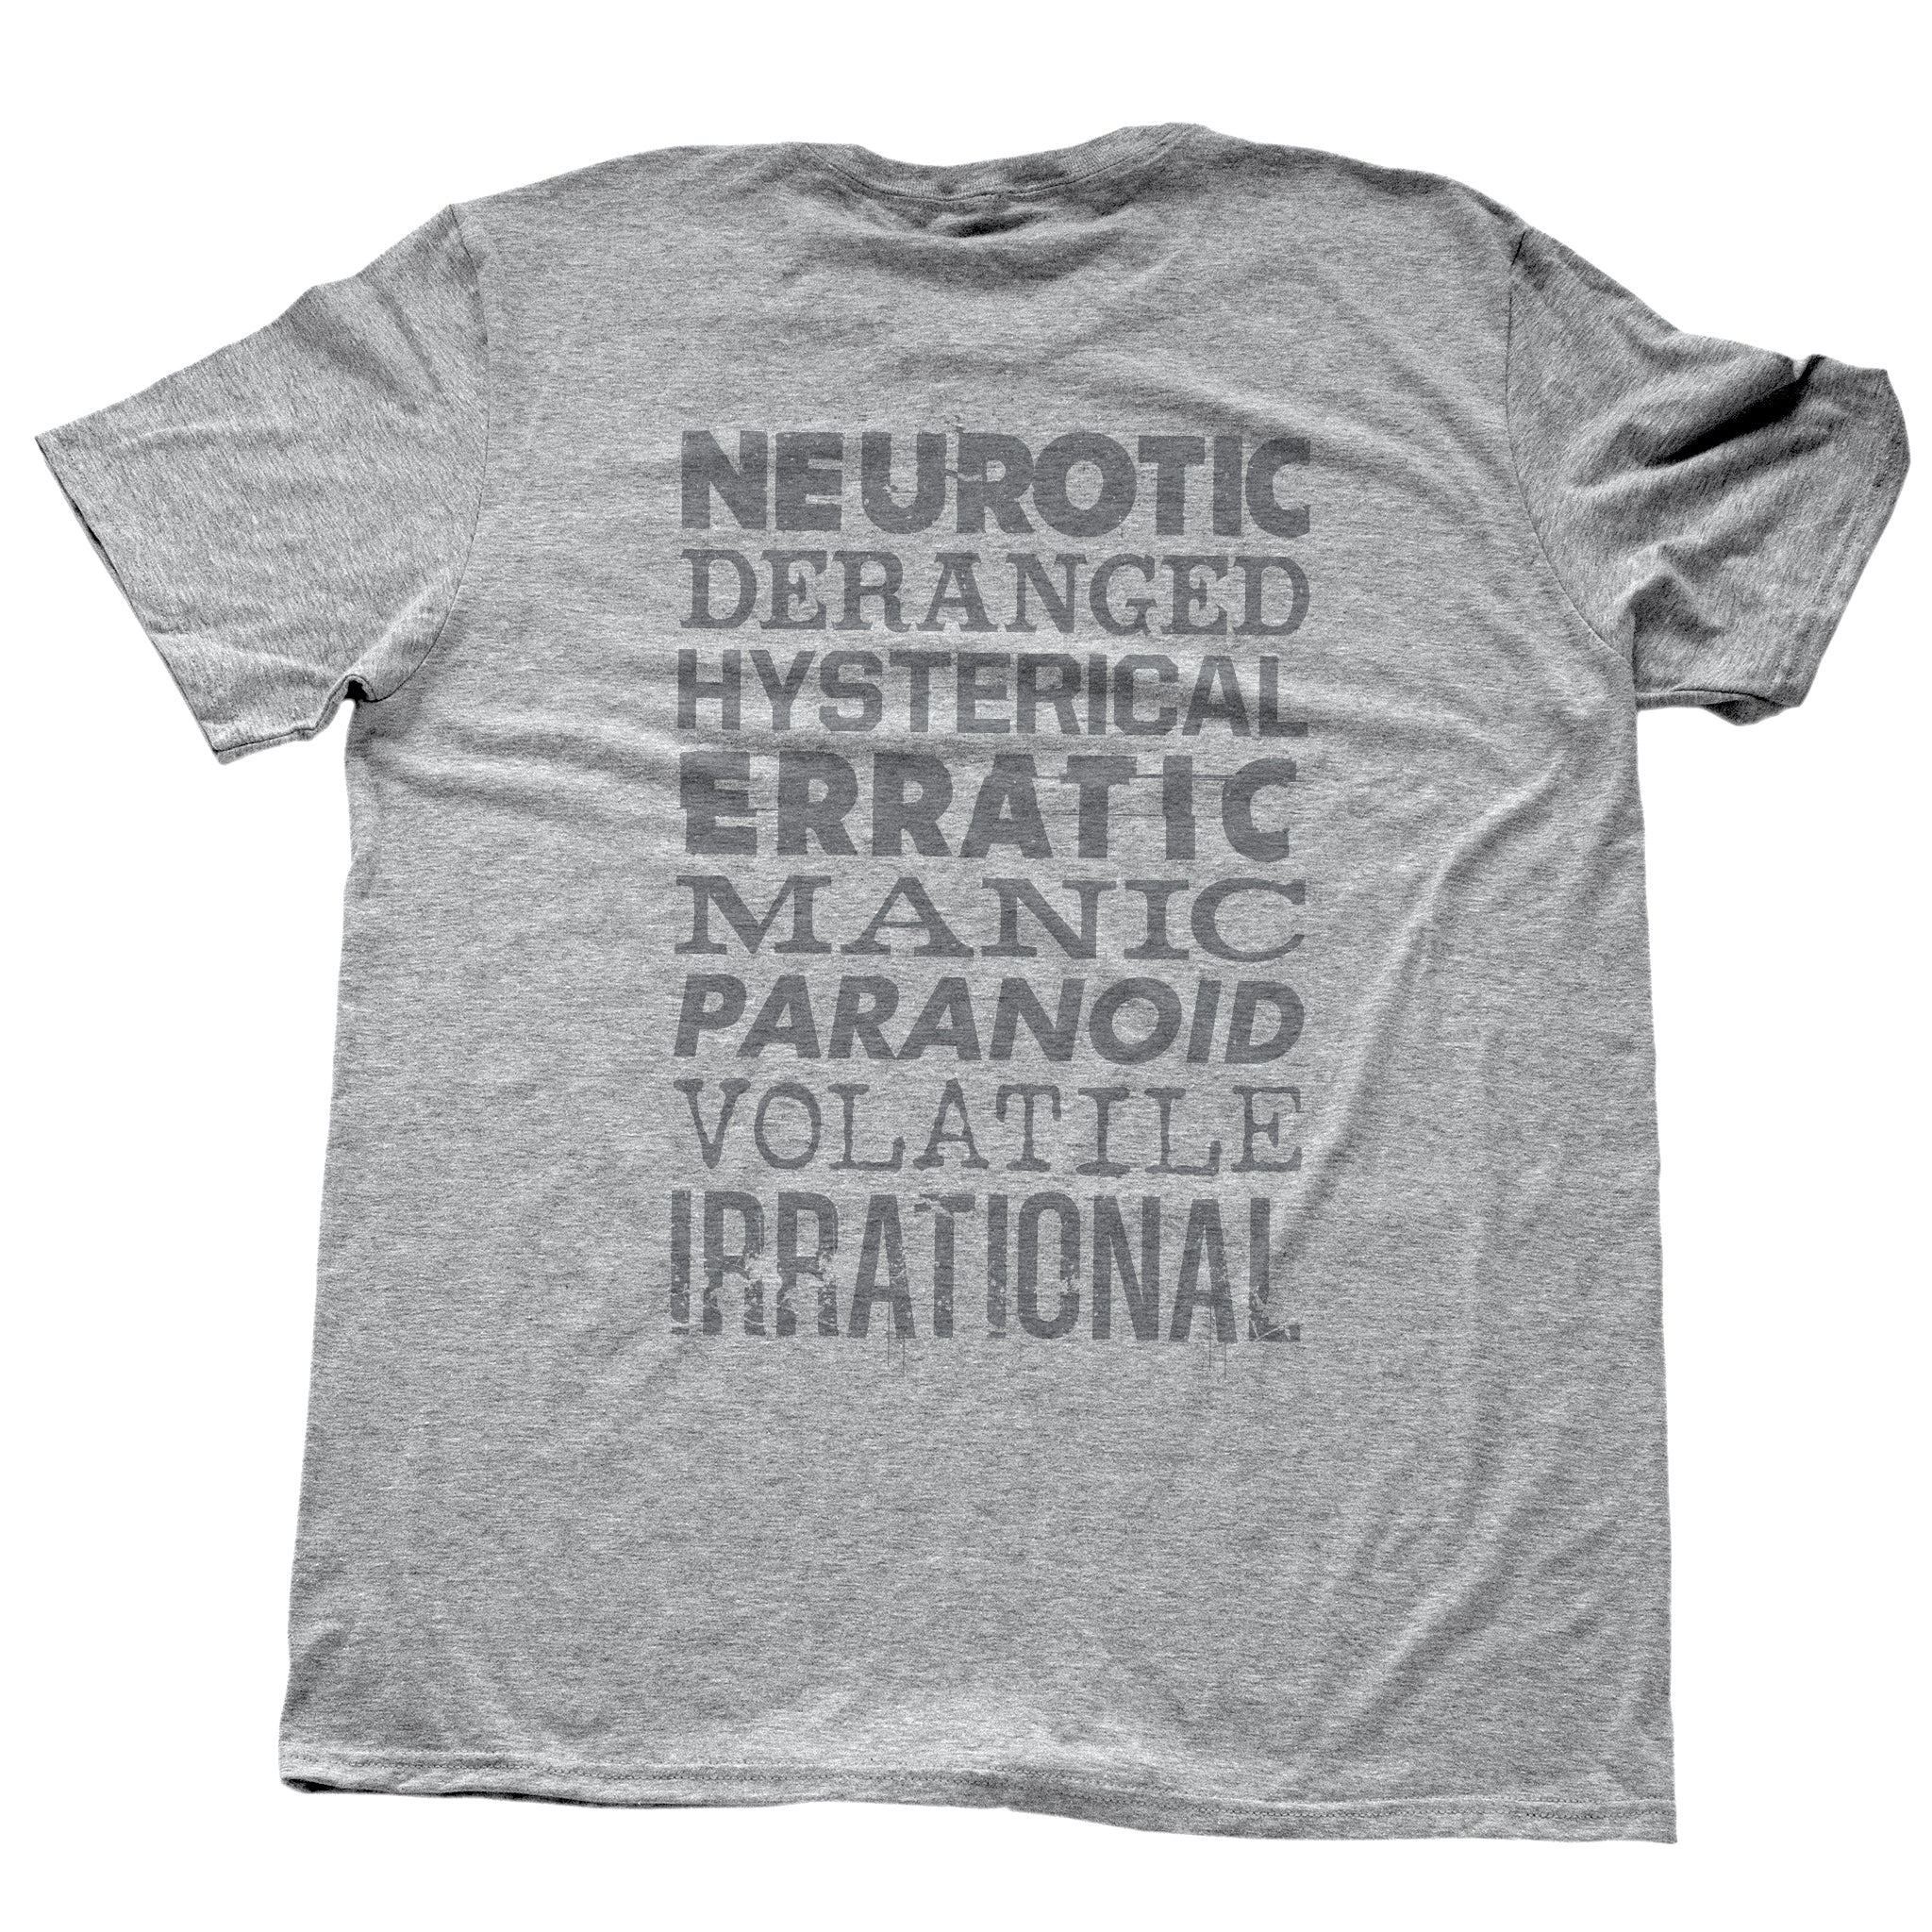 The back of a sarcastic fashion graphic t-shirt in Heather Gray, with a stack of various typographic treatments, with the words “Neurotic, Deranged, Hysterical, Erratic, Manic, Paranoid, Volatile, Irrational.” By fashion brand YUF, from wolfsaint.net